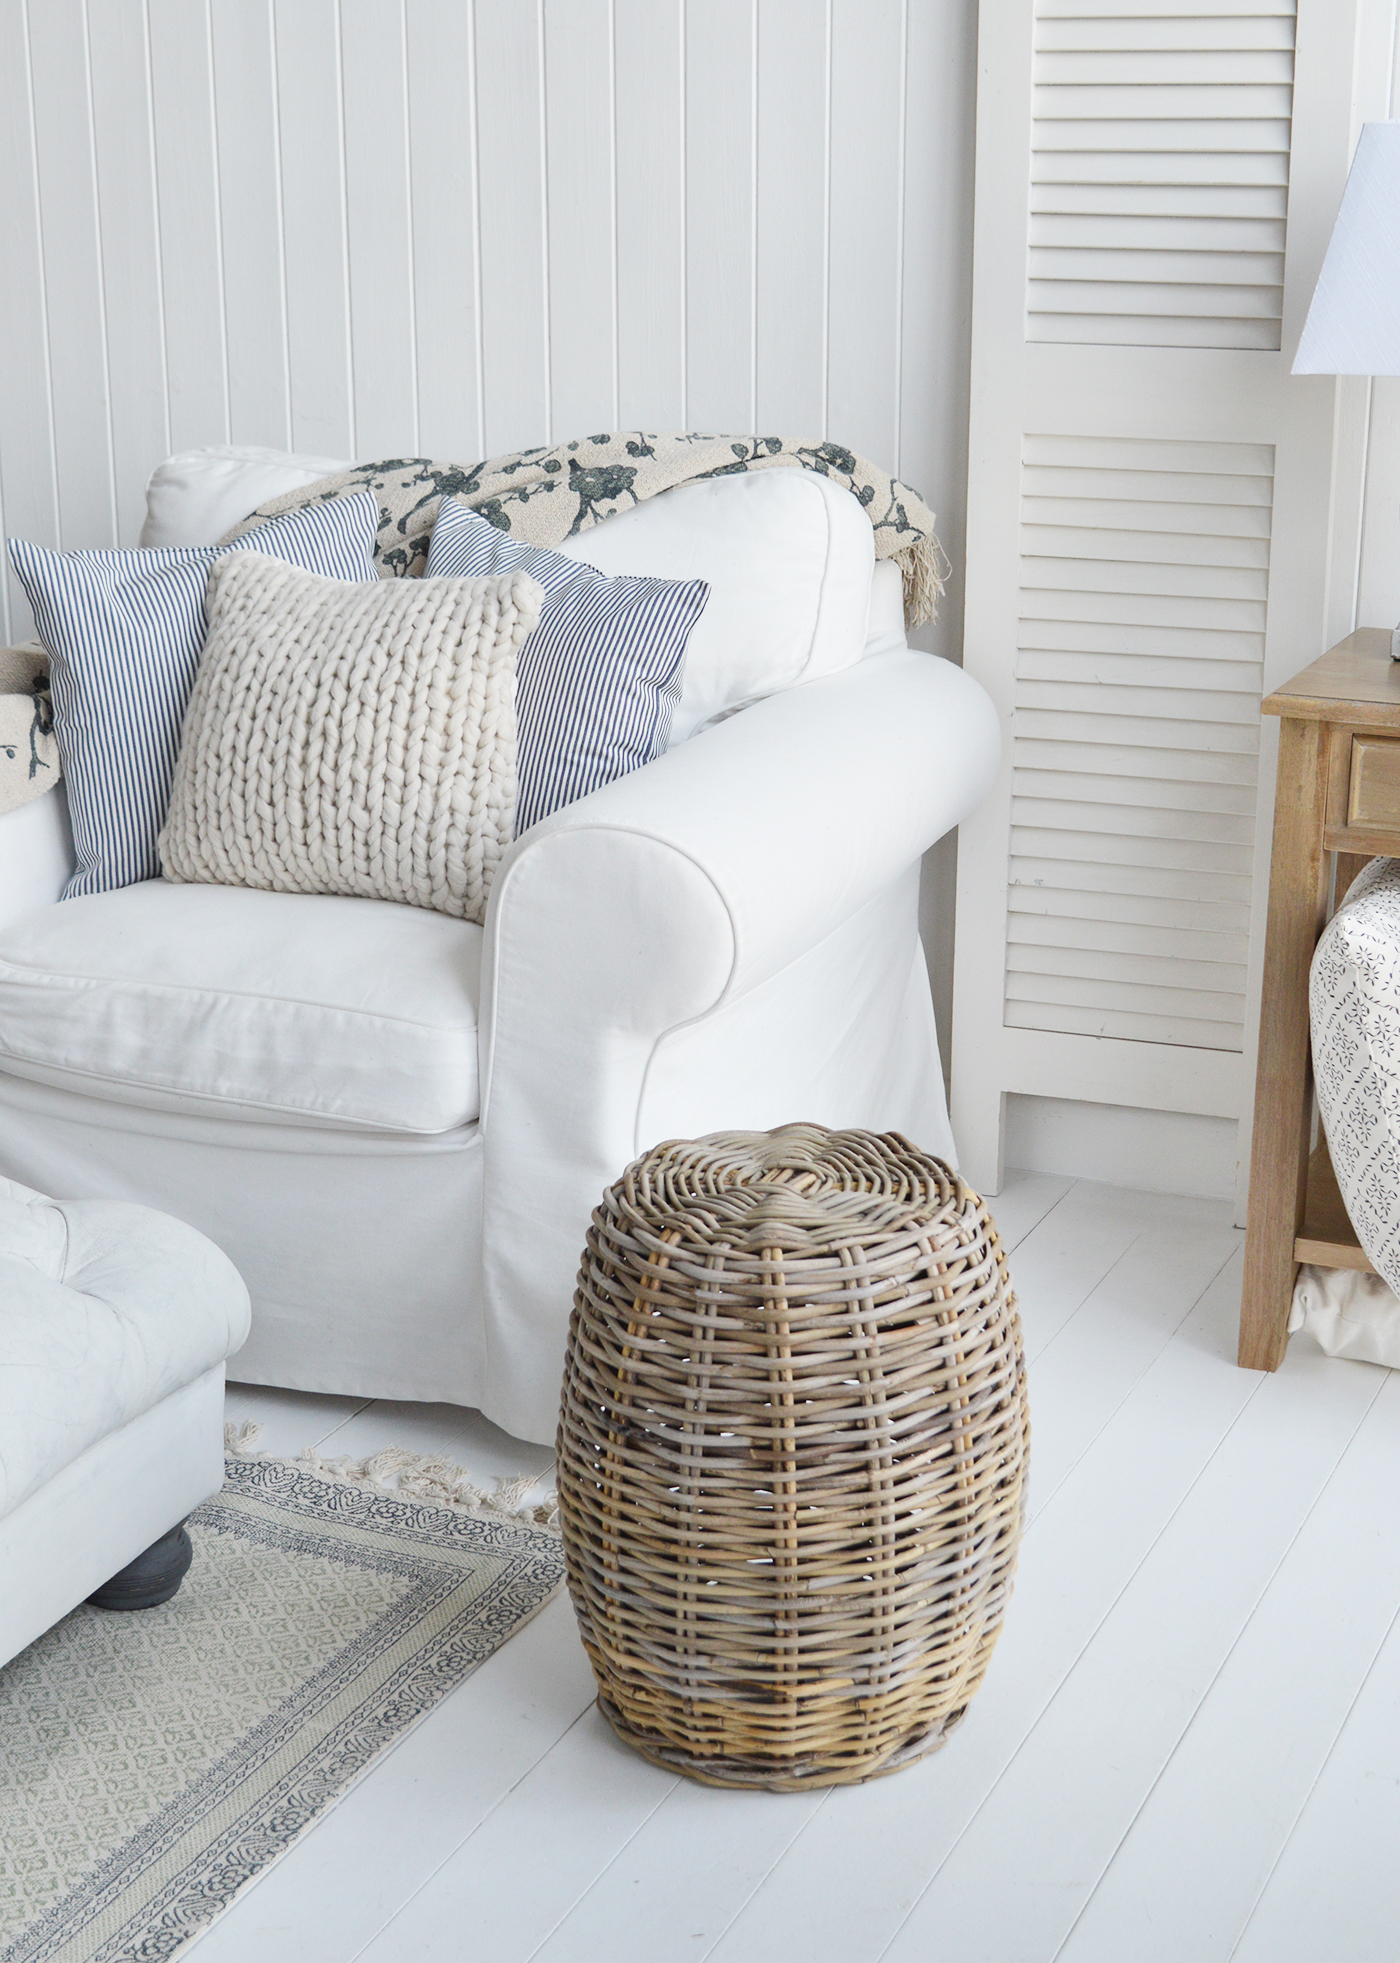 Casco Bay willow stool or seat for New England interiors in all Modern Country, Farmhouse and coastal homes from the White Lighthouse Furniture